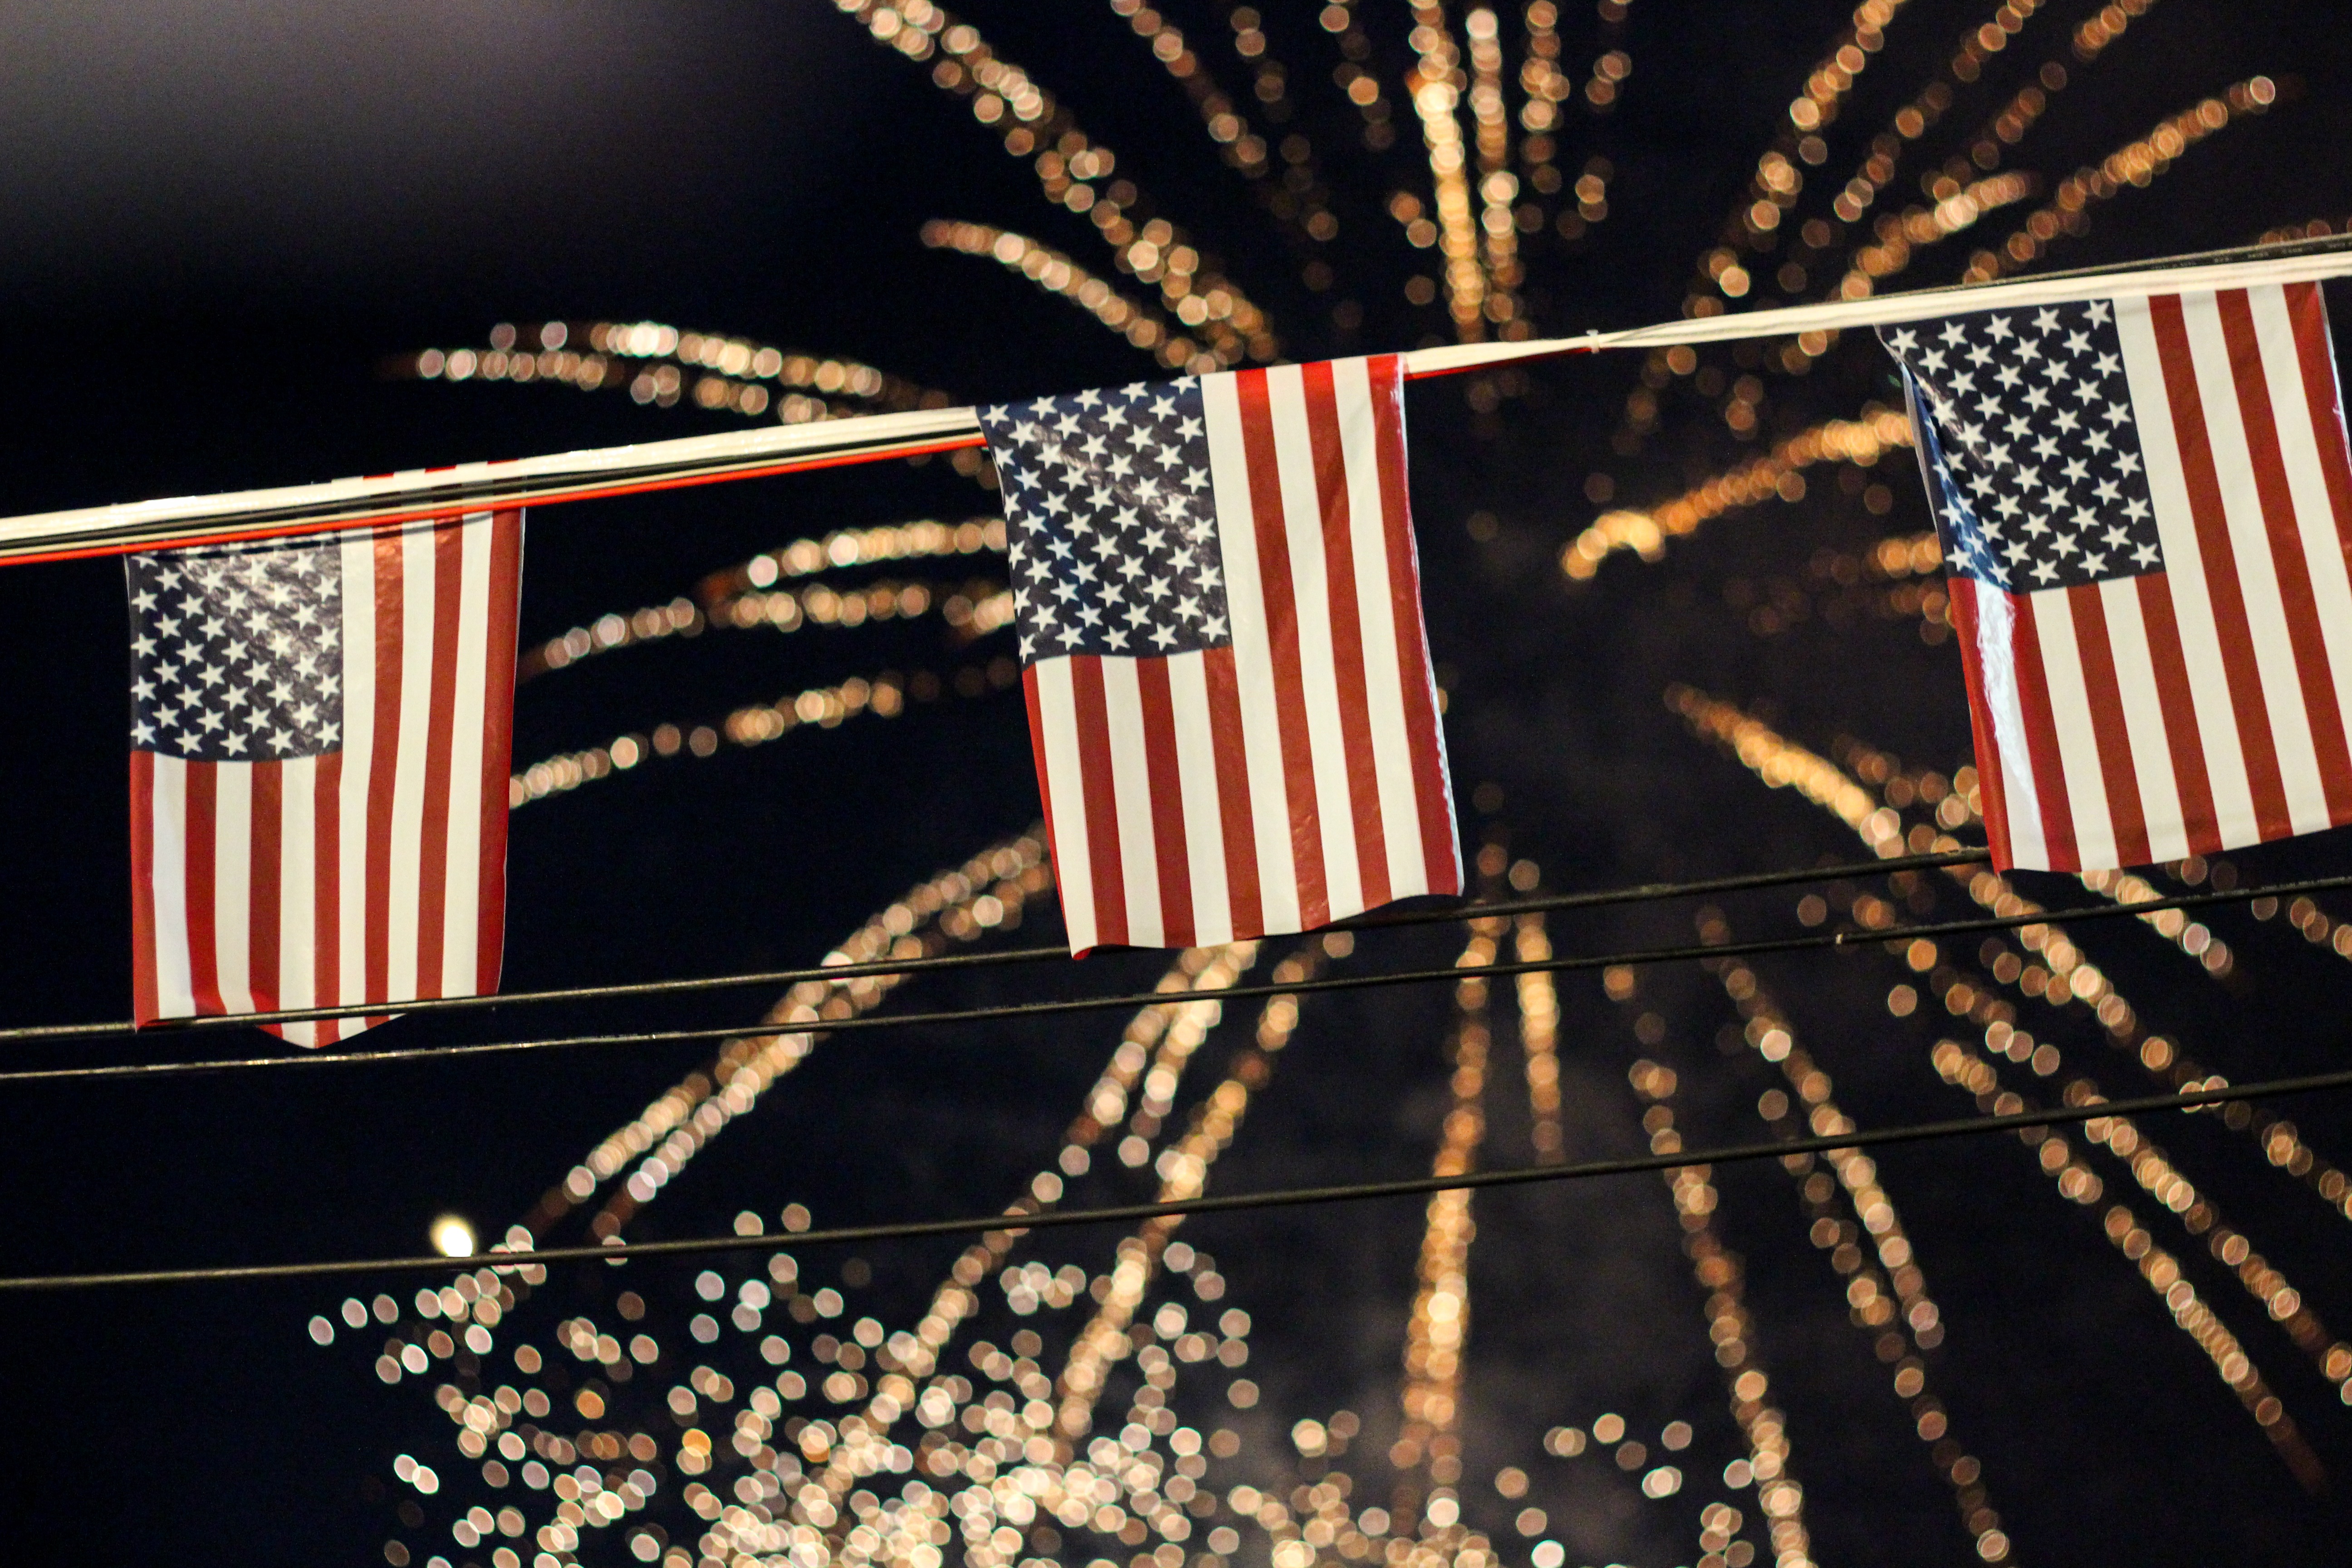 How to Stream Fourth of July Fireworks Shows at Home This Weekend